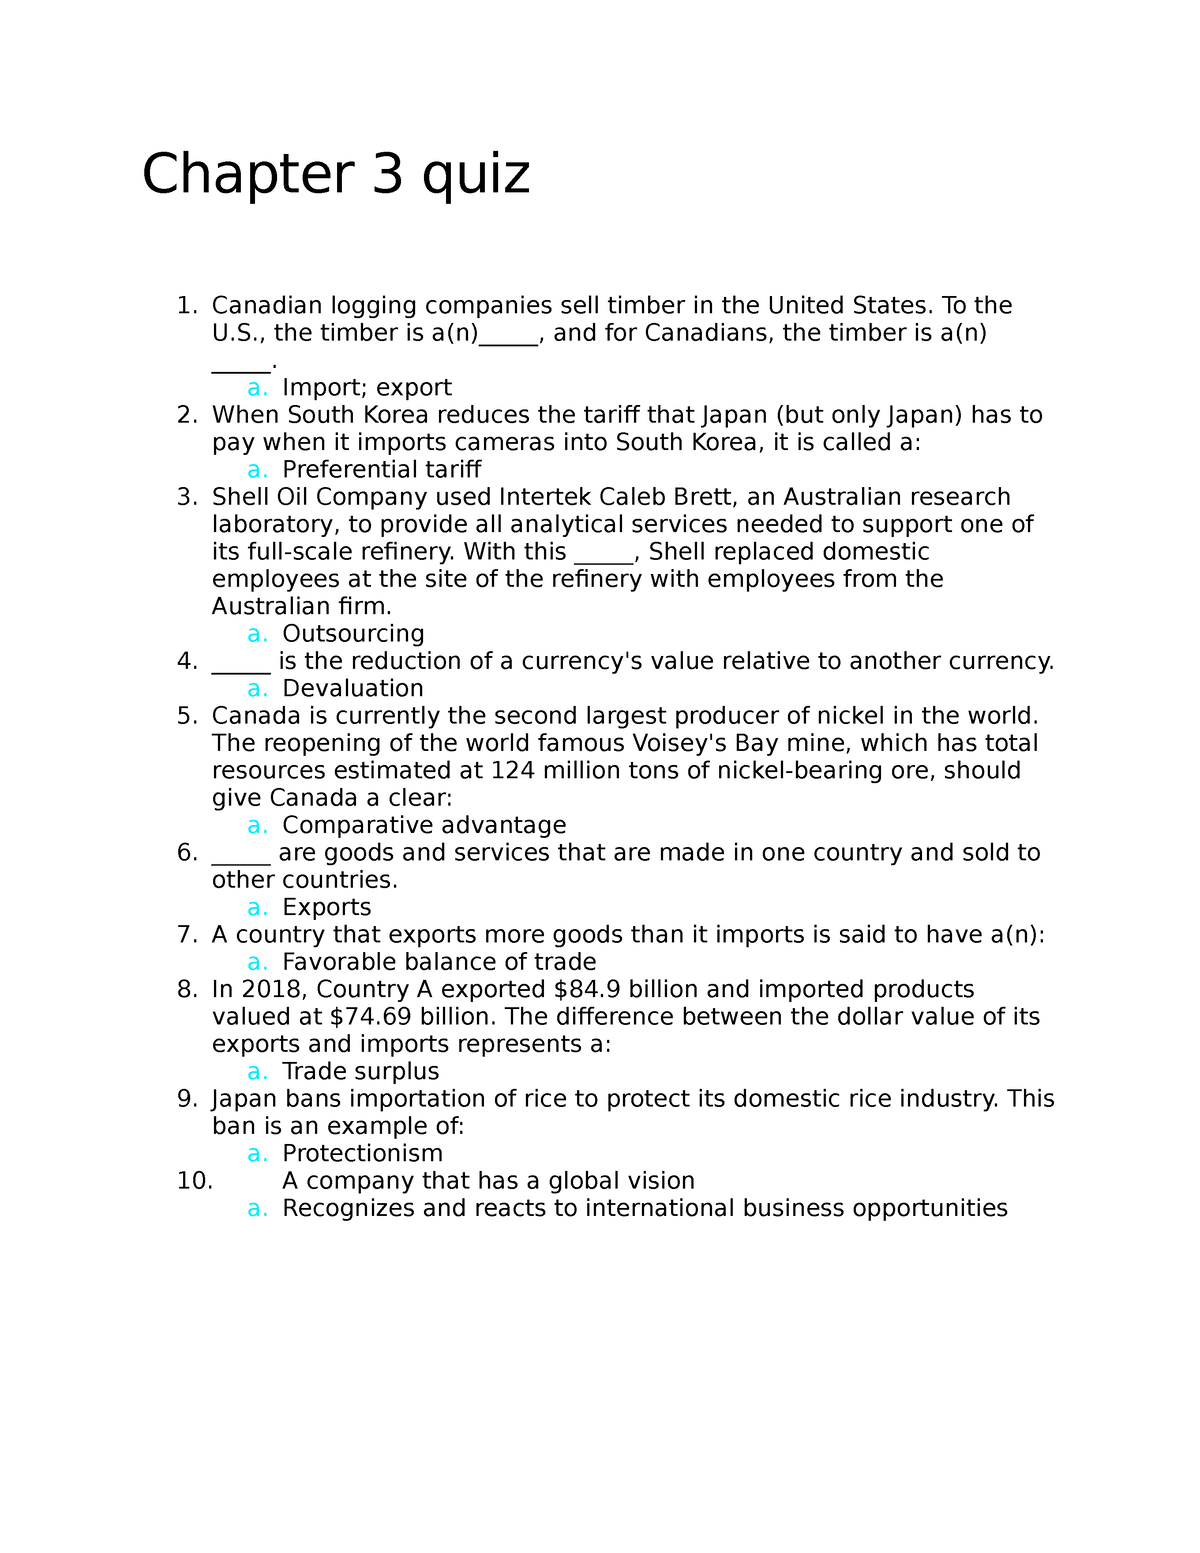 chapter-3-quiz-quiz-questions-and-answers-chapter-3-quiz-canadian